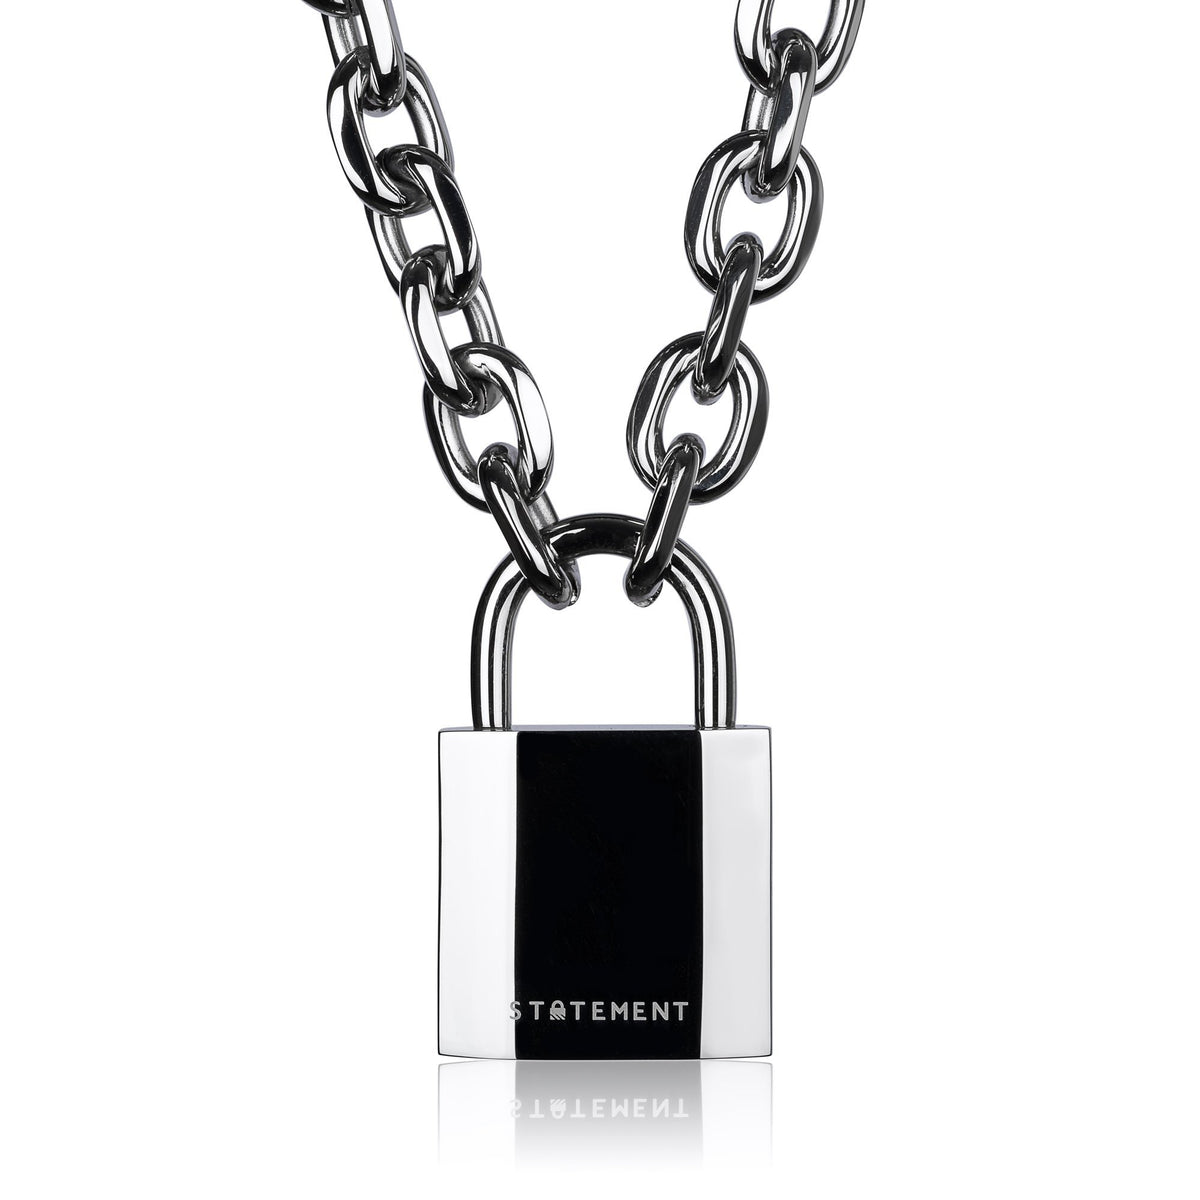 Silver Tone Lock Necklace by Statement Collective_01